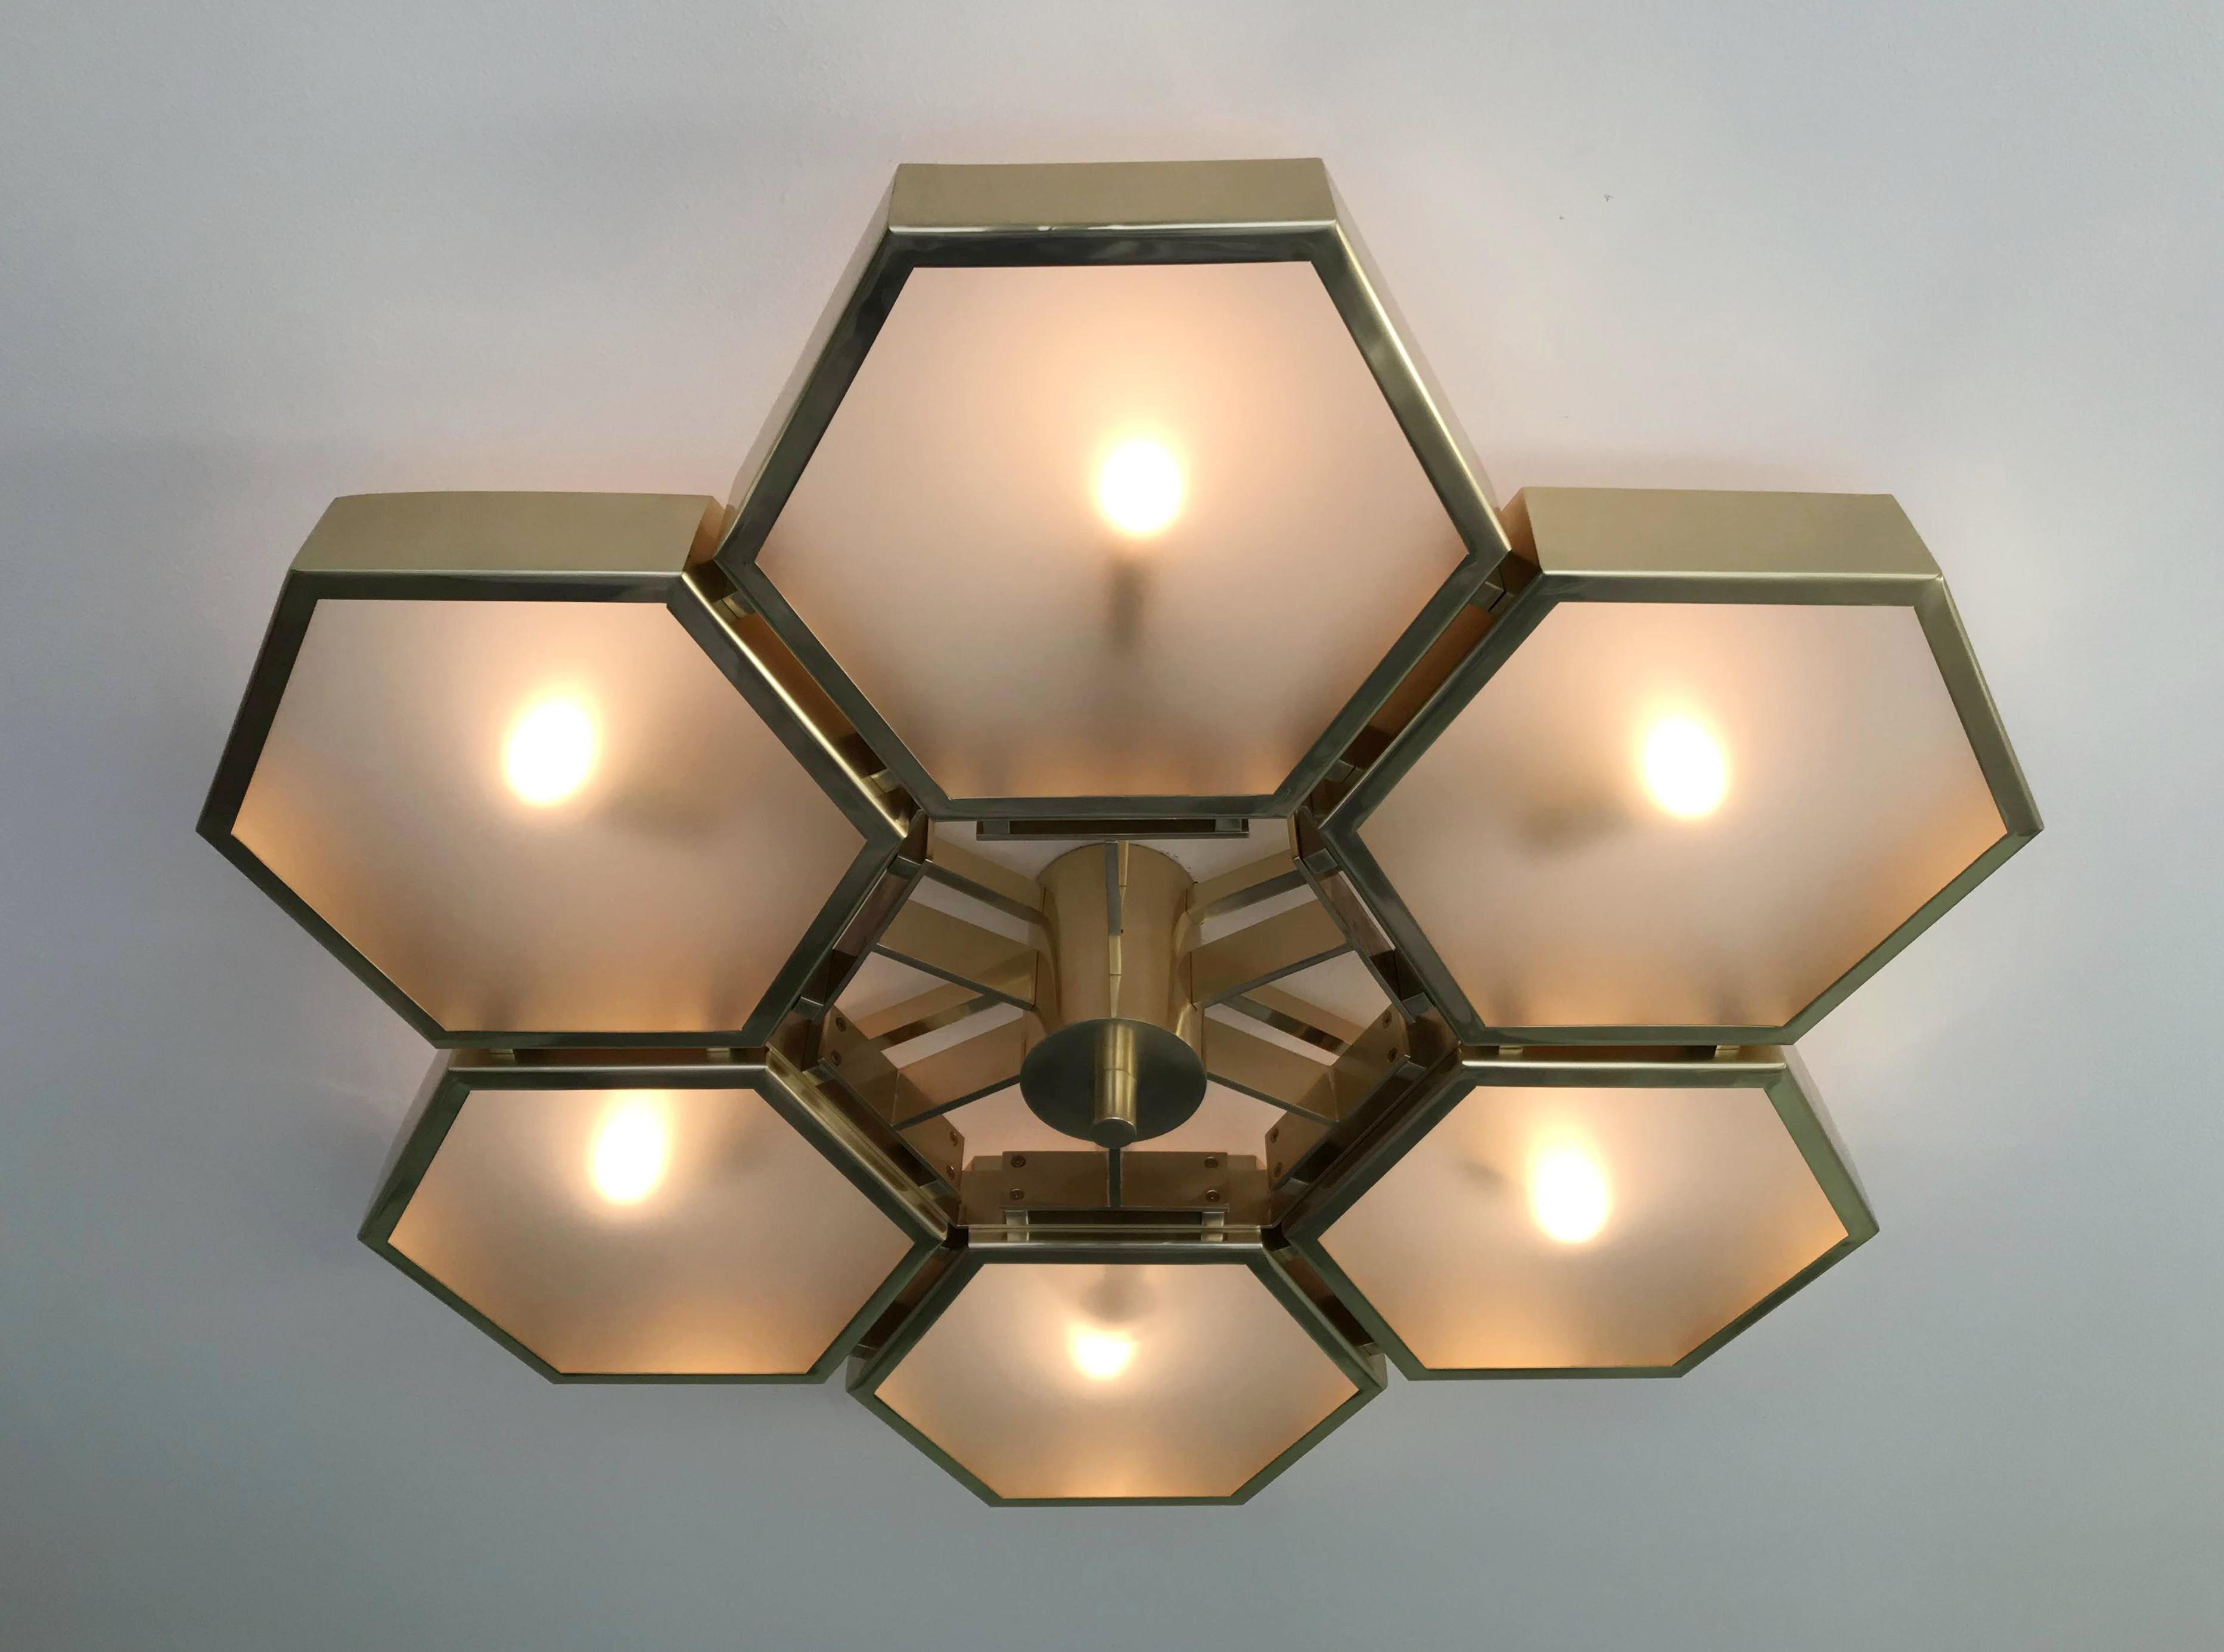 Impressive Italian flush mount with 6 hexagonal satin glass diffusers, mounted on thick hexagonal brass cells in natural lacquered finish, designed by Fabio Bergomi for Fabio Ltd / Made in Italy
6 lights / E12 or E14 type / max 40W each
Measures: